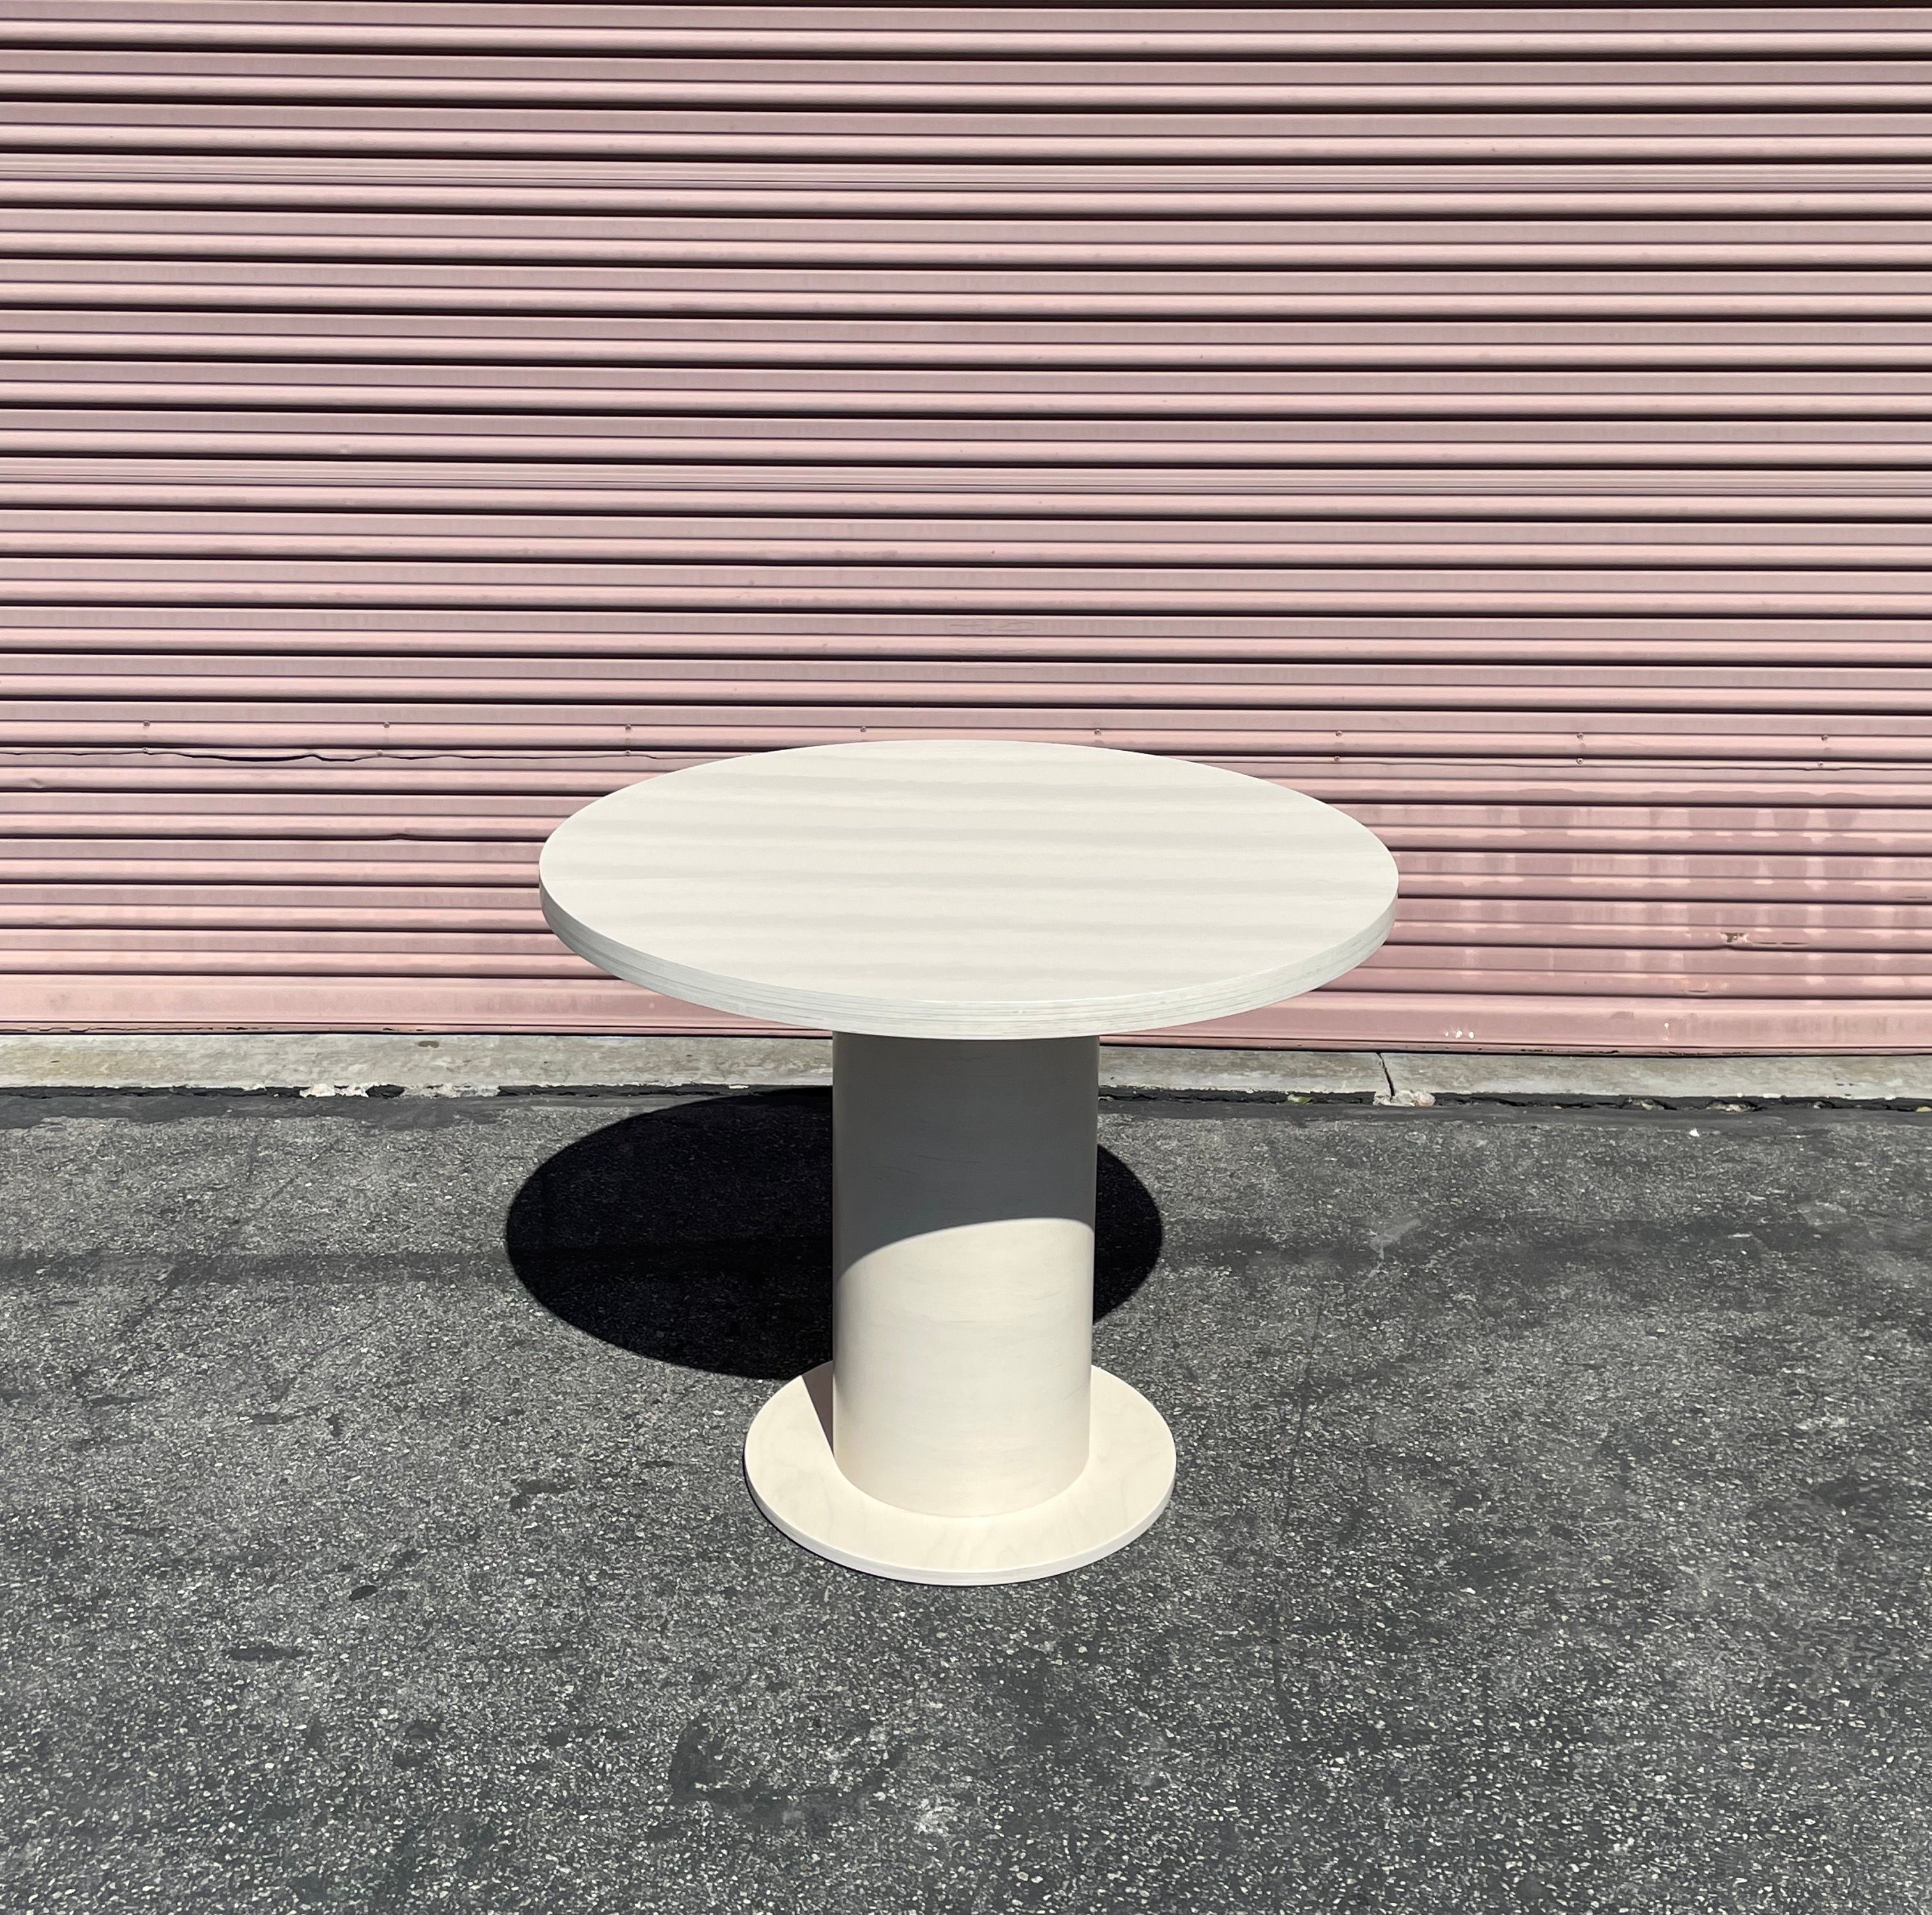  High Gloss Pedestal Table - White Stain product image 0